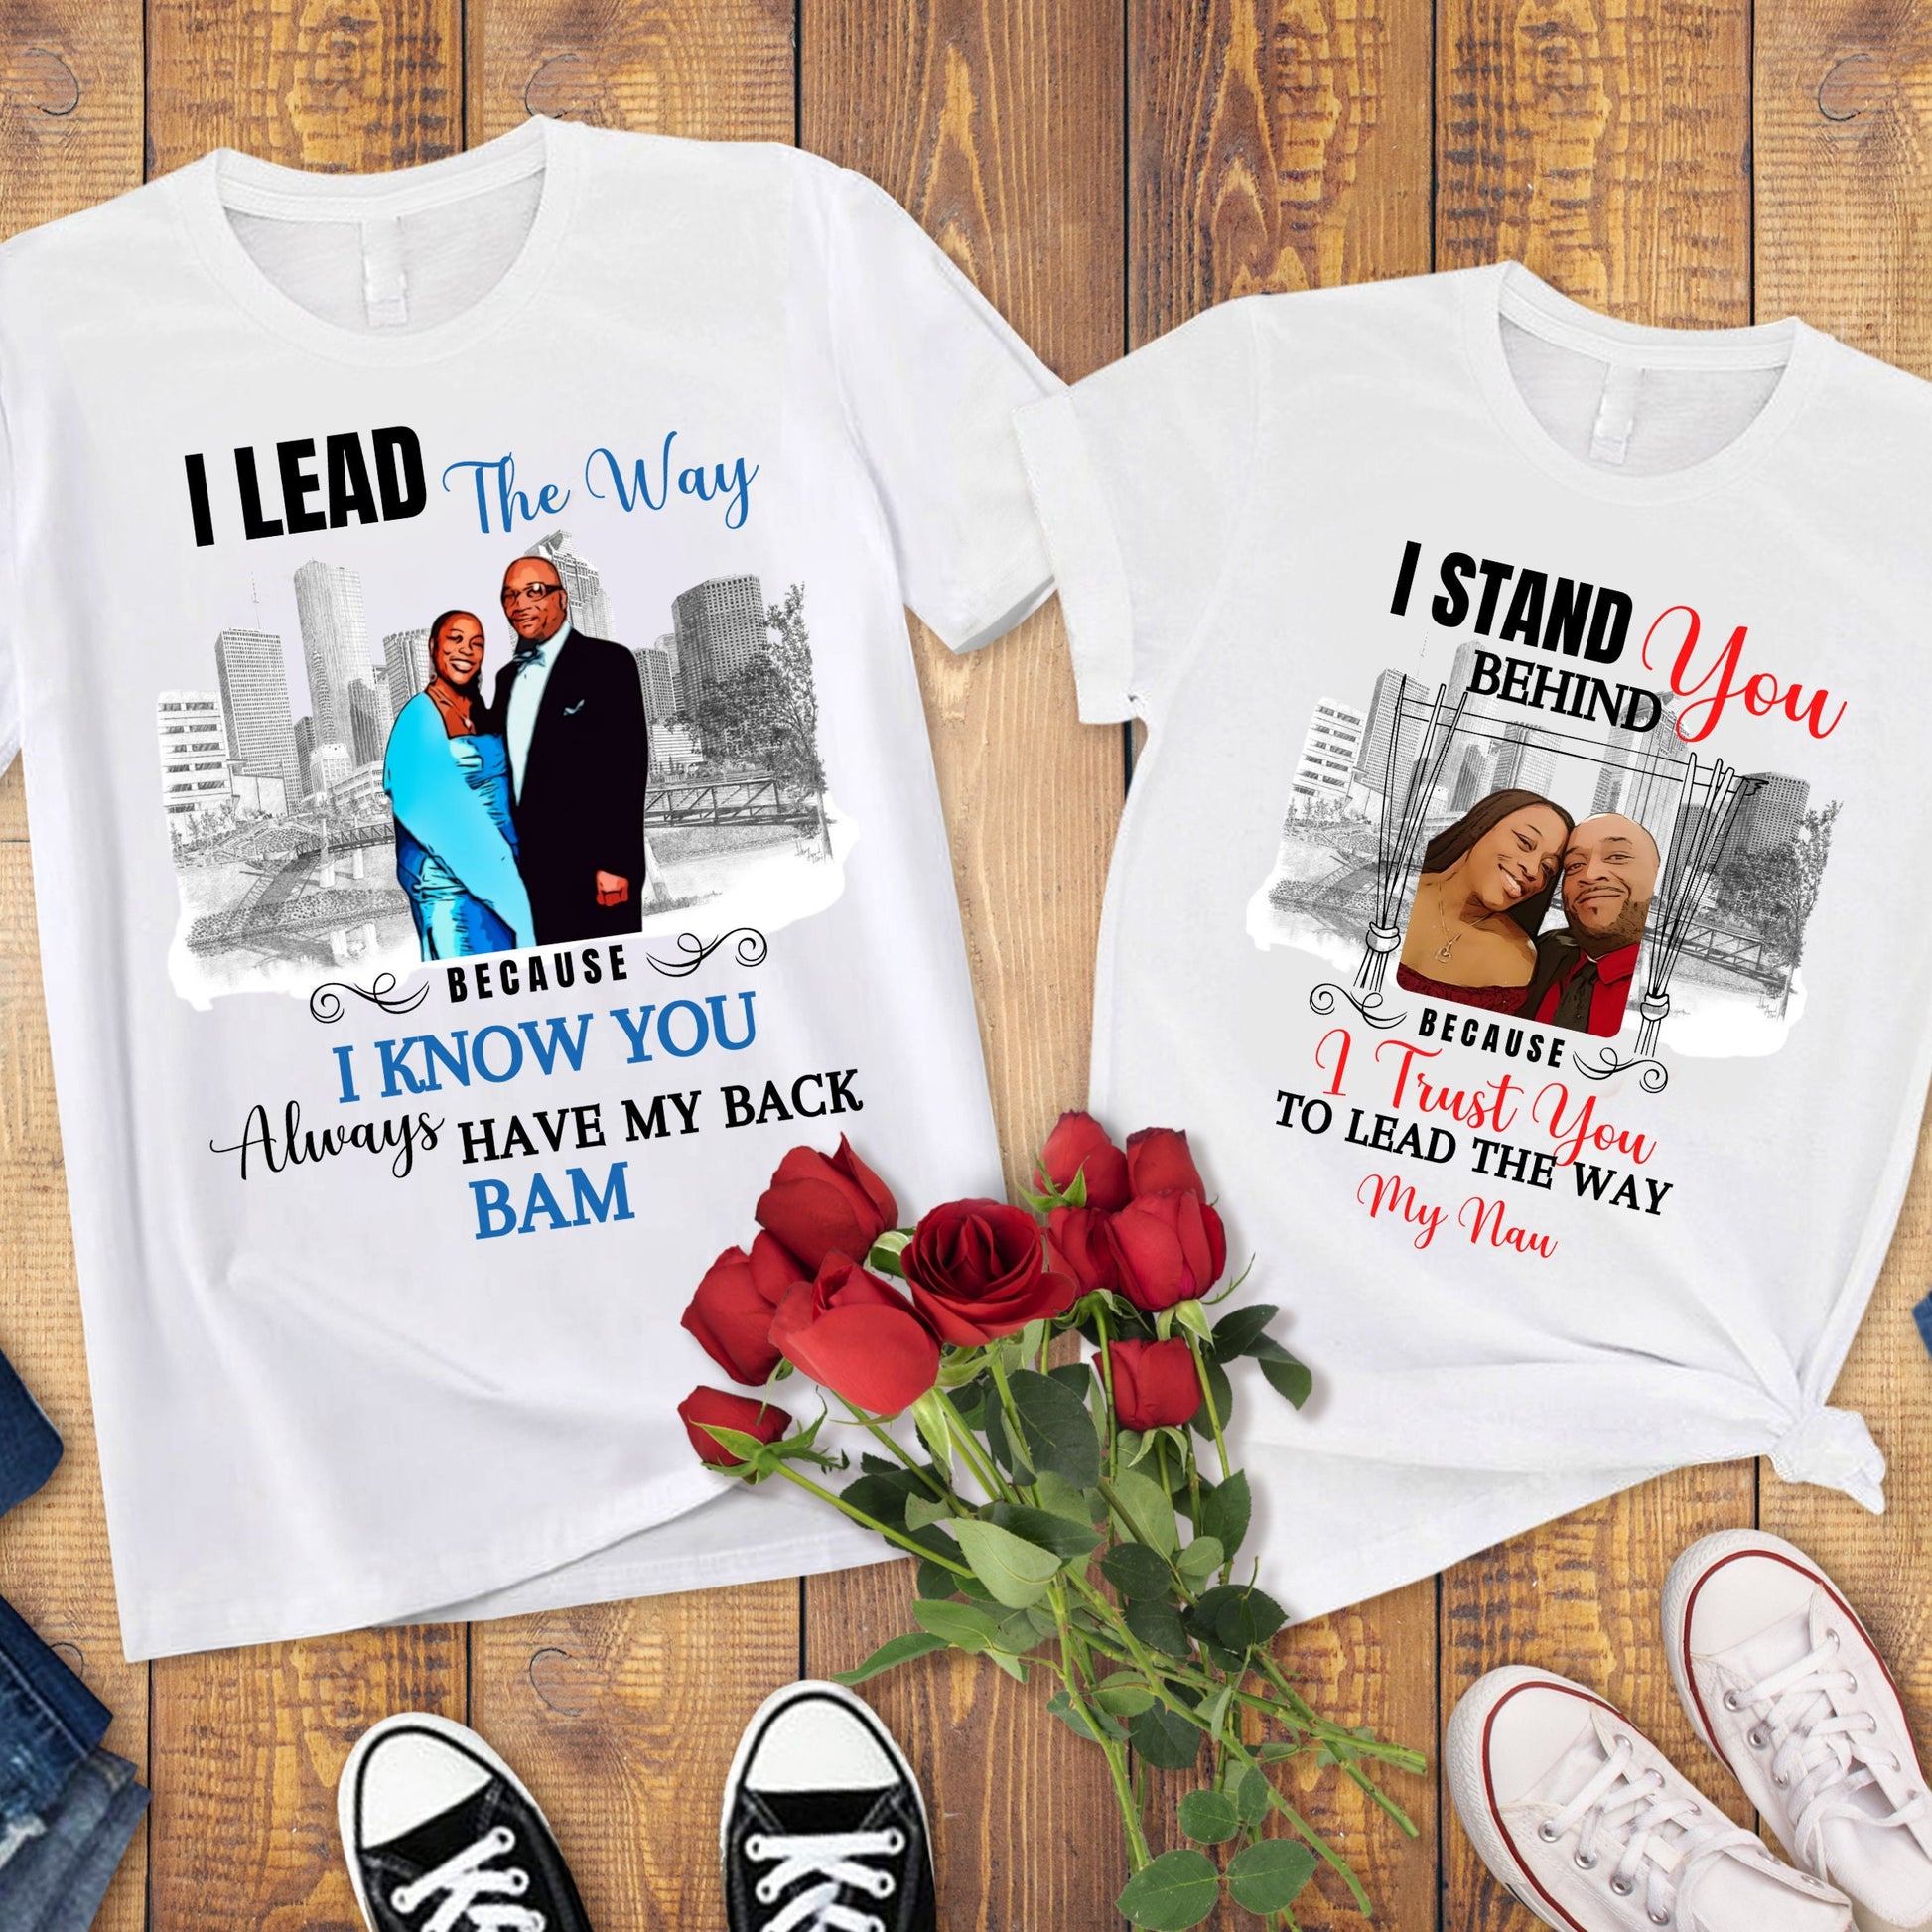 Couples Tee, Couples Shirt, Couples Gift, I Lead The Way, I Stand Behind You, Valentine's Day Expedite 1 to 3 Days / Cartoon The Image